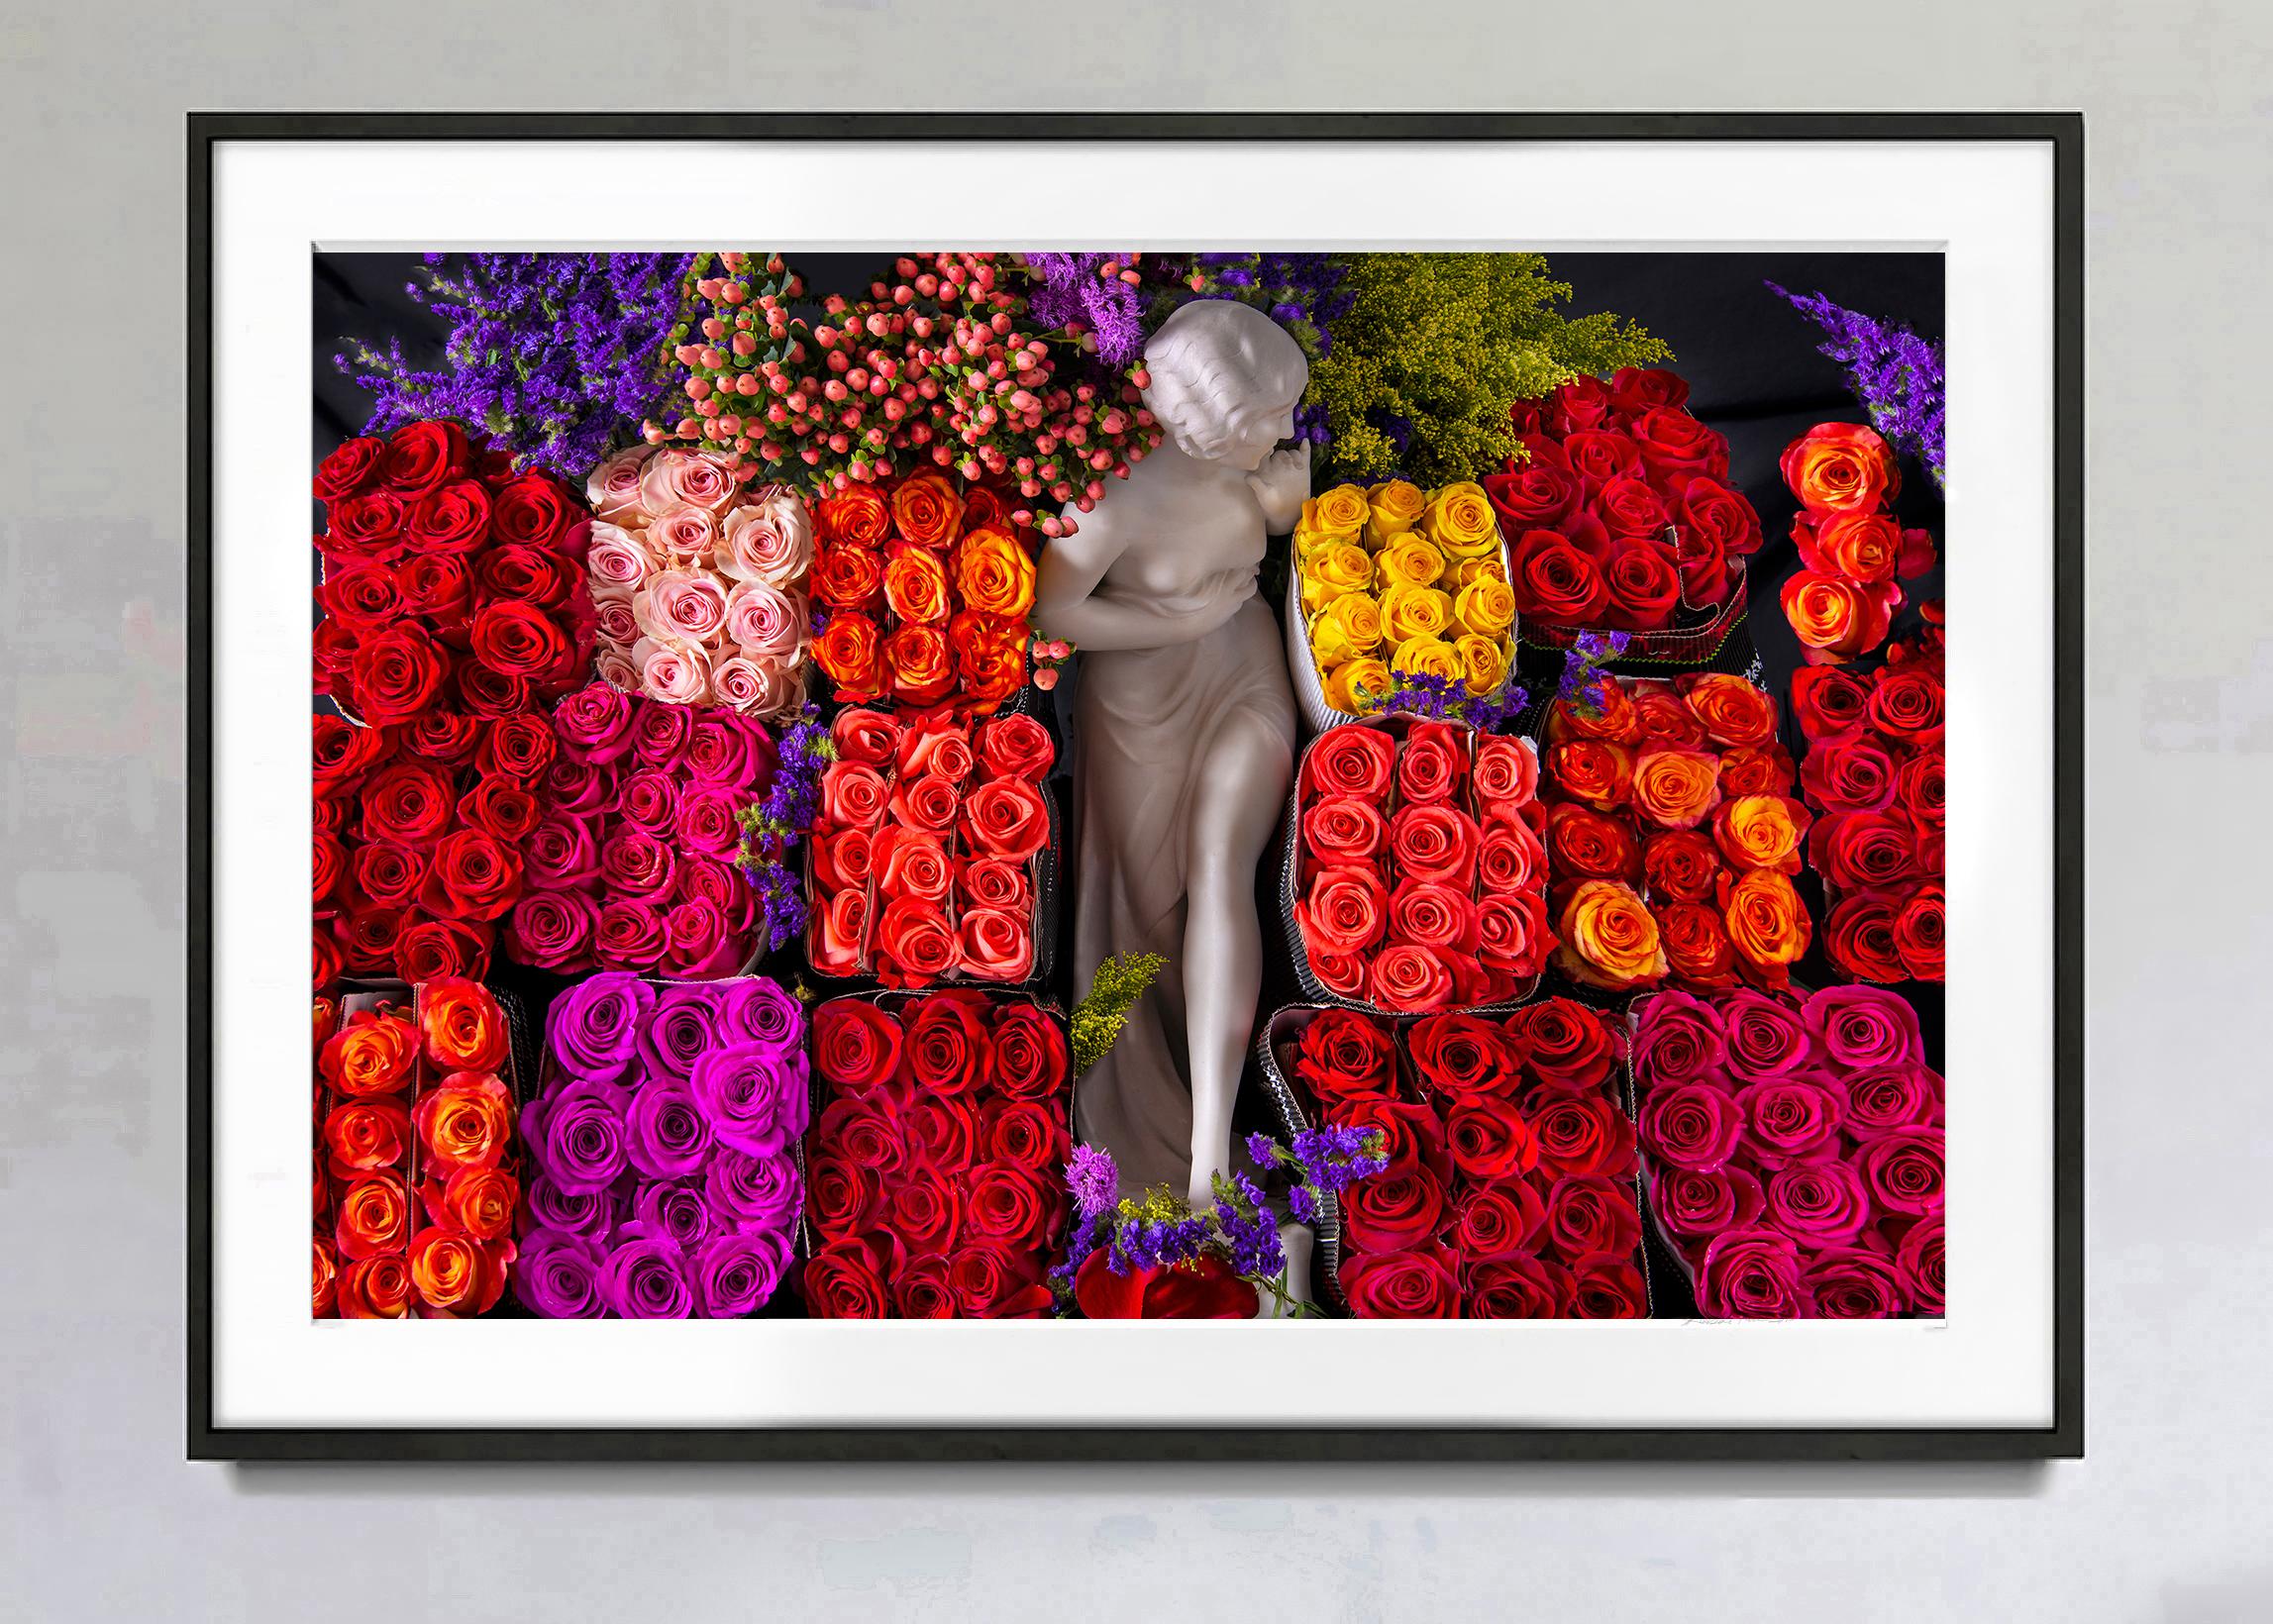 Hundreds of Red Roses, Pink Roses, and Yellow Roses in stacked blocks flank a 19th Century nude marble statue of a nude young girl.  In a sense, the statue and the roses are one and the same. This elaborately composed image is the quintessence of